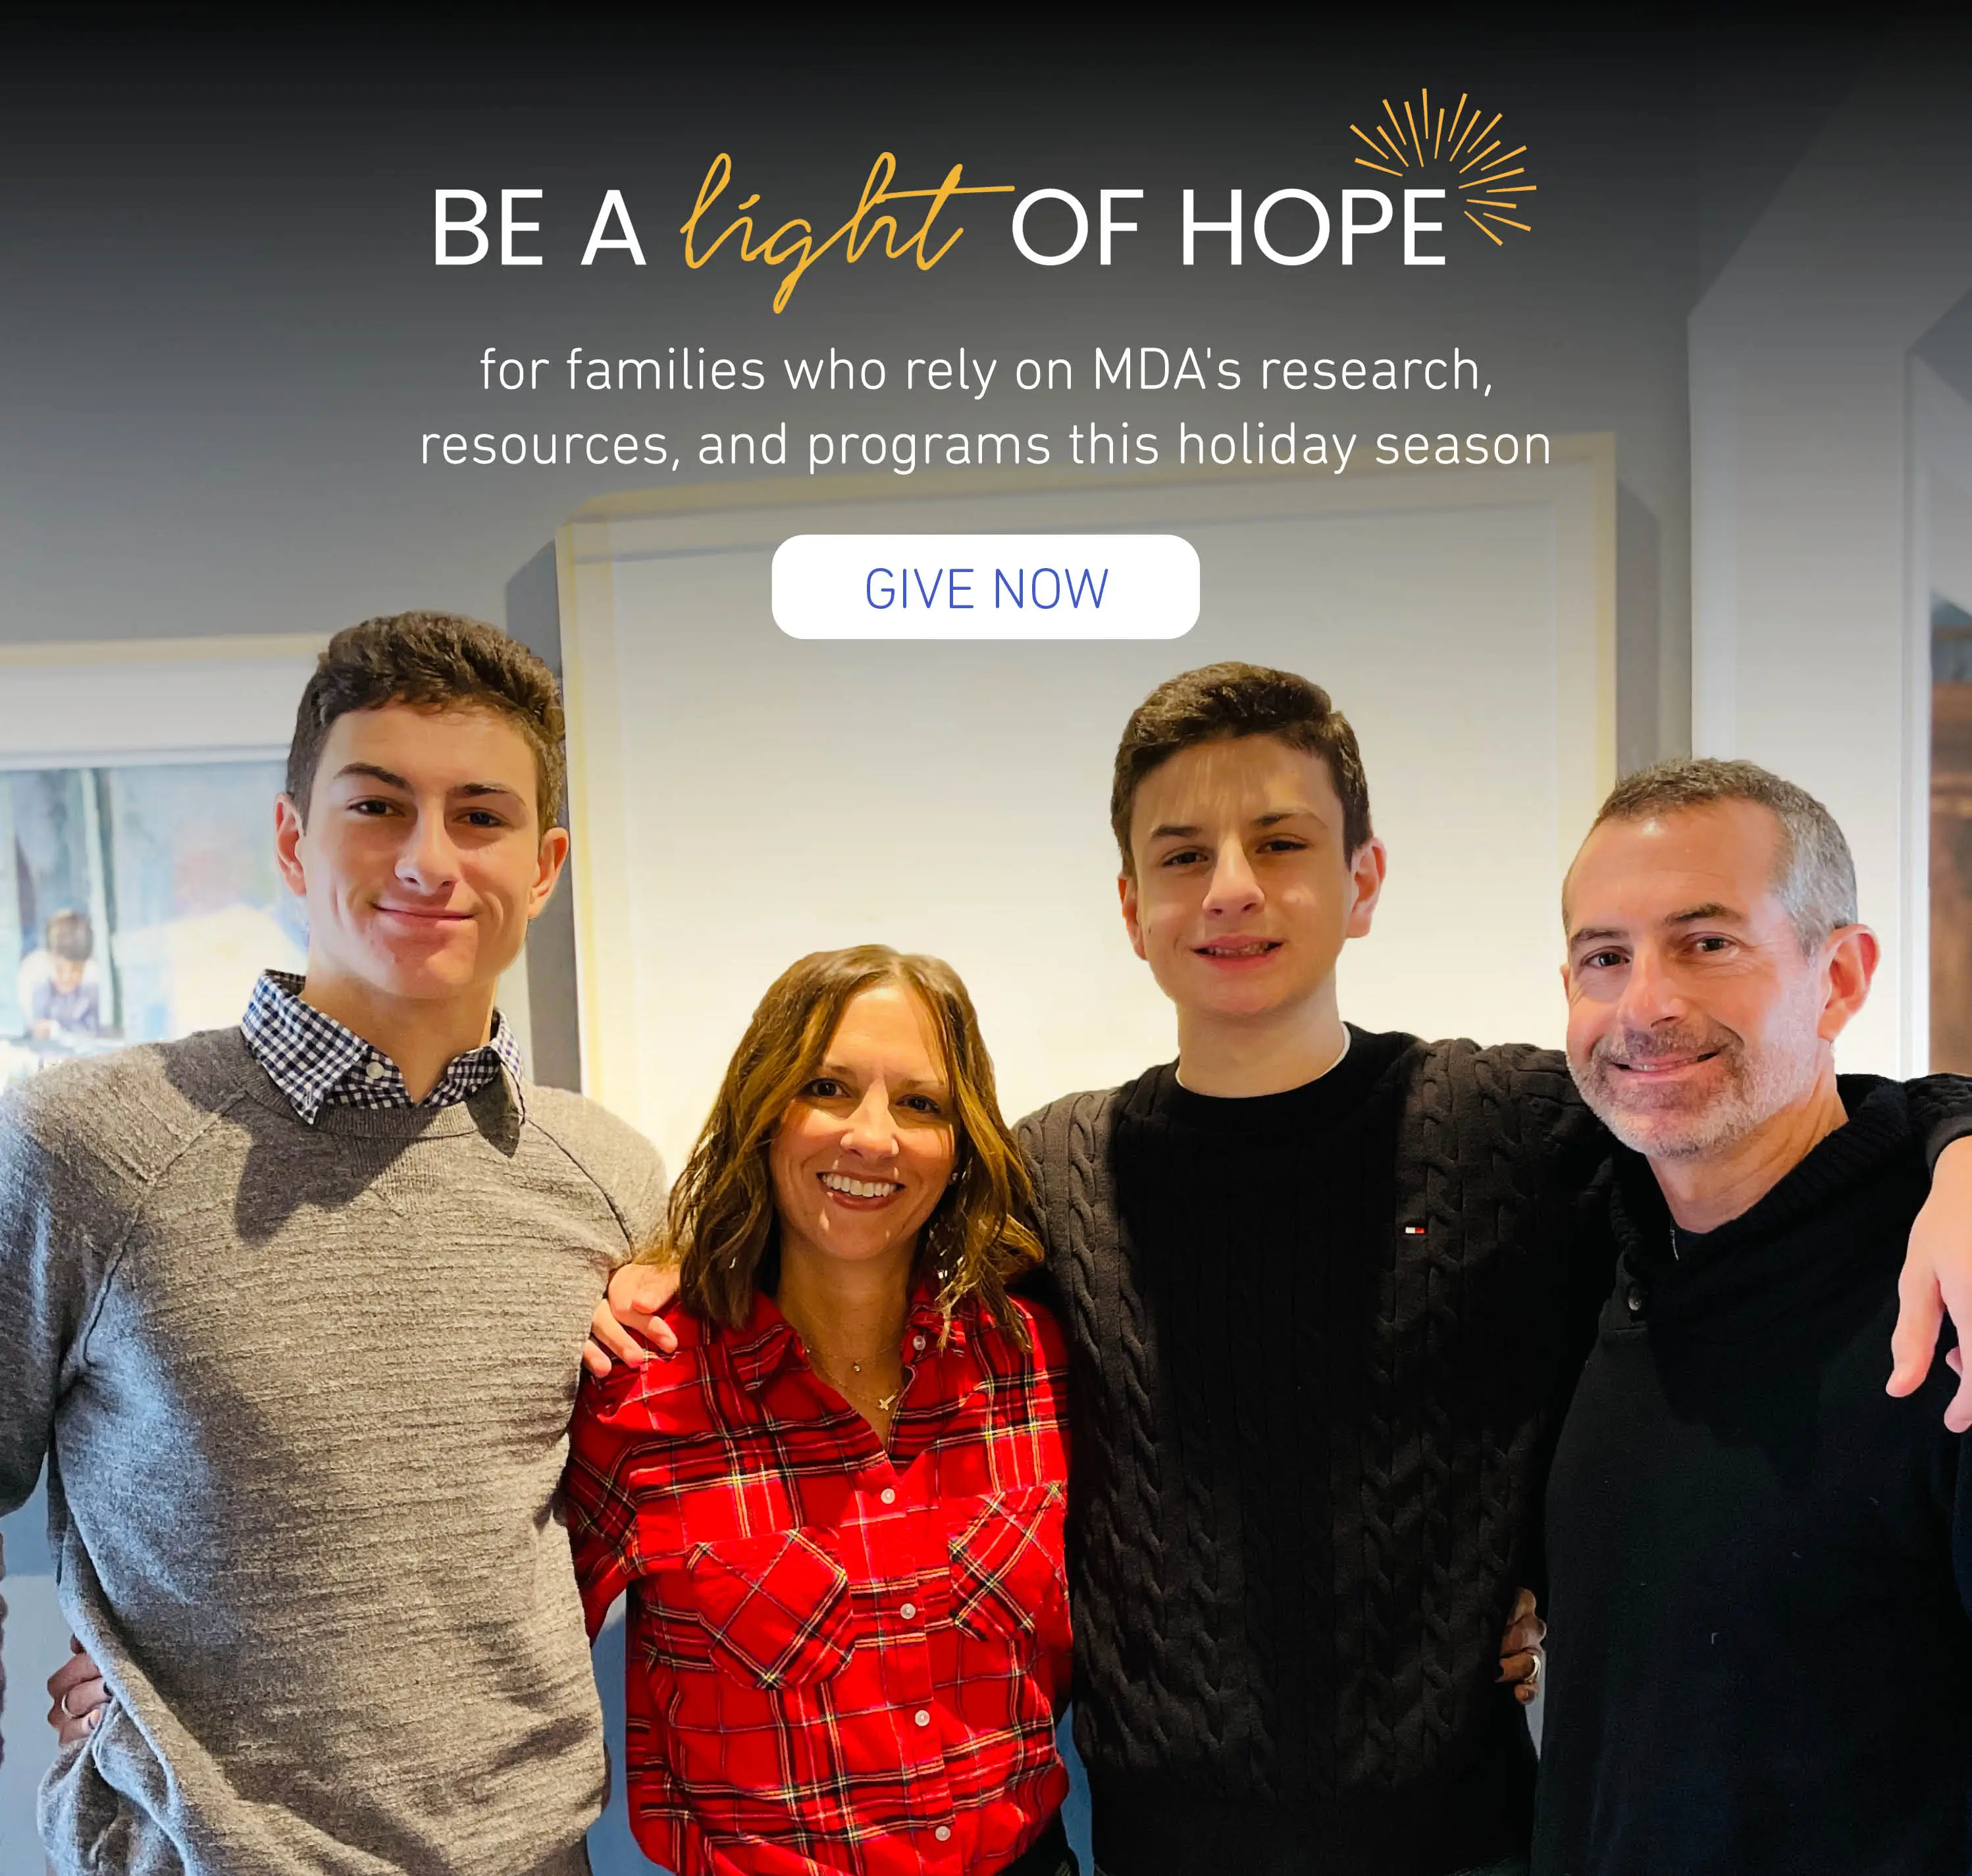 Be a light of hope for families who rely on MDA's research, resources, and programs this holiday season. Give now.